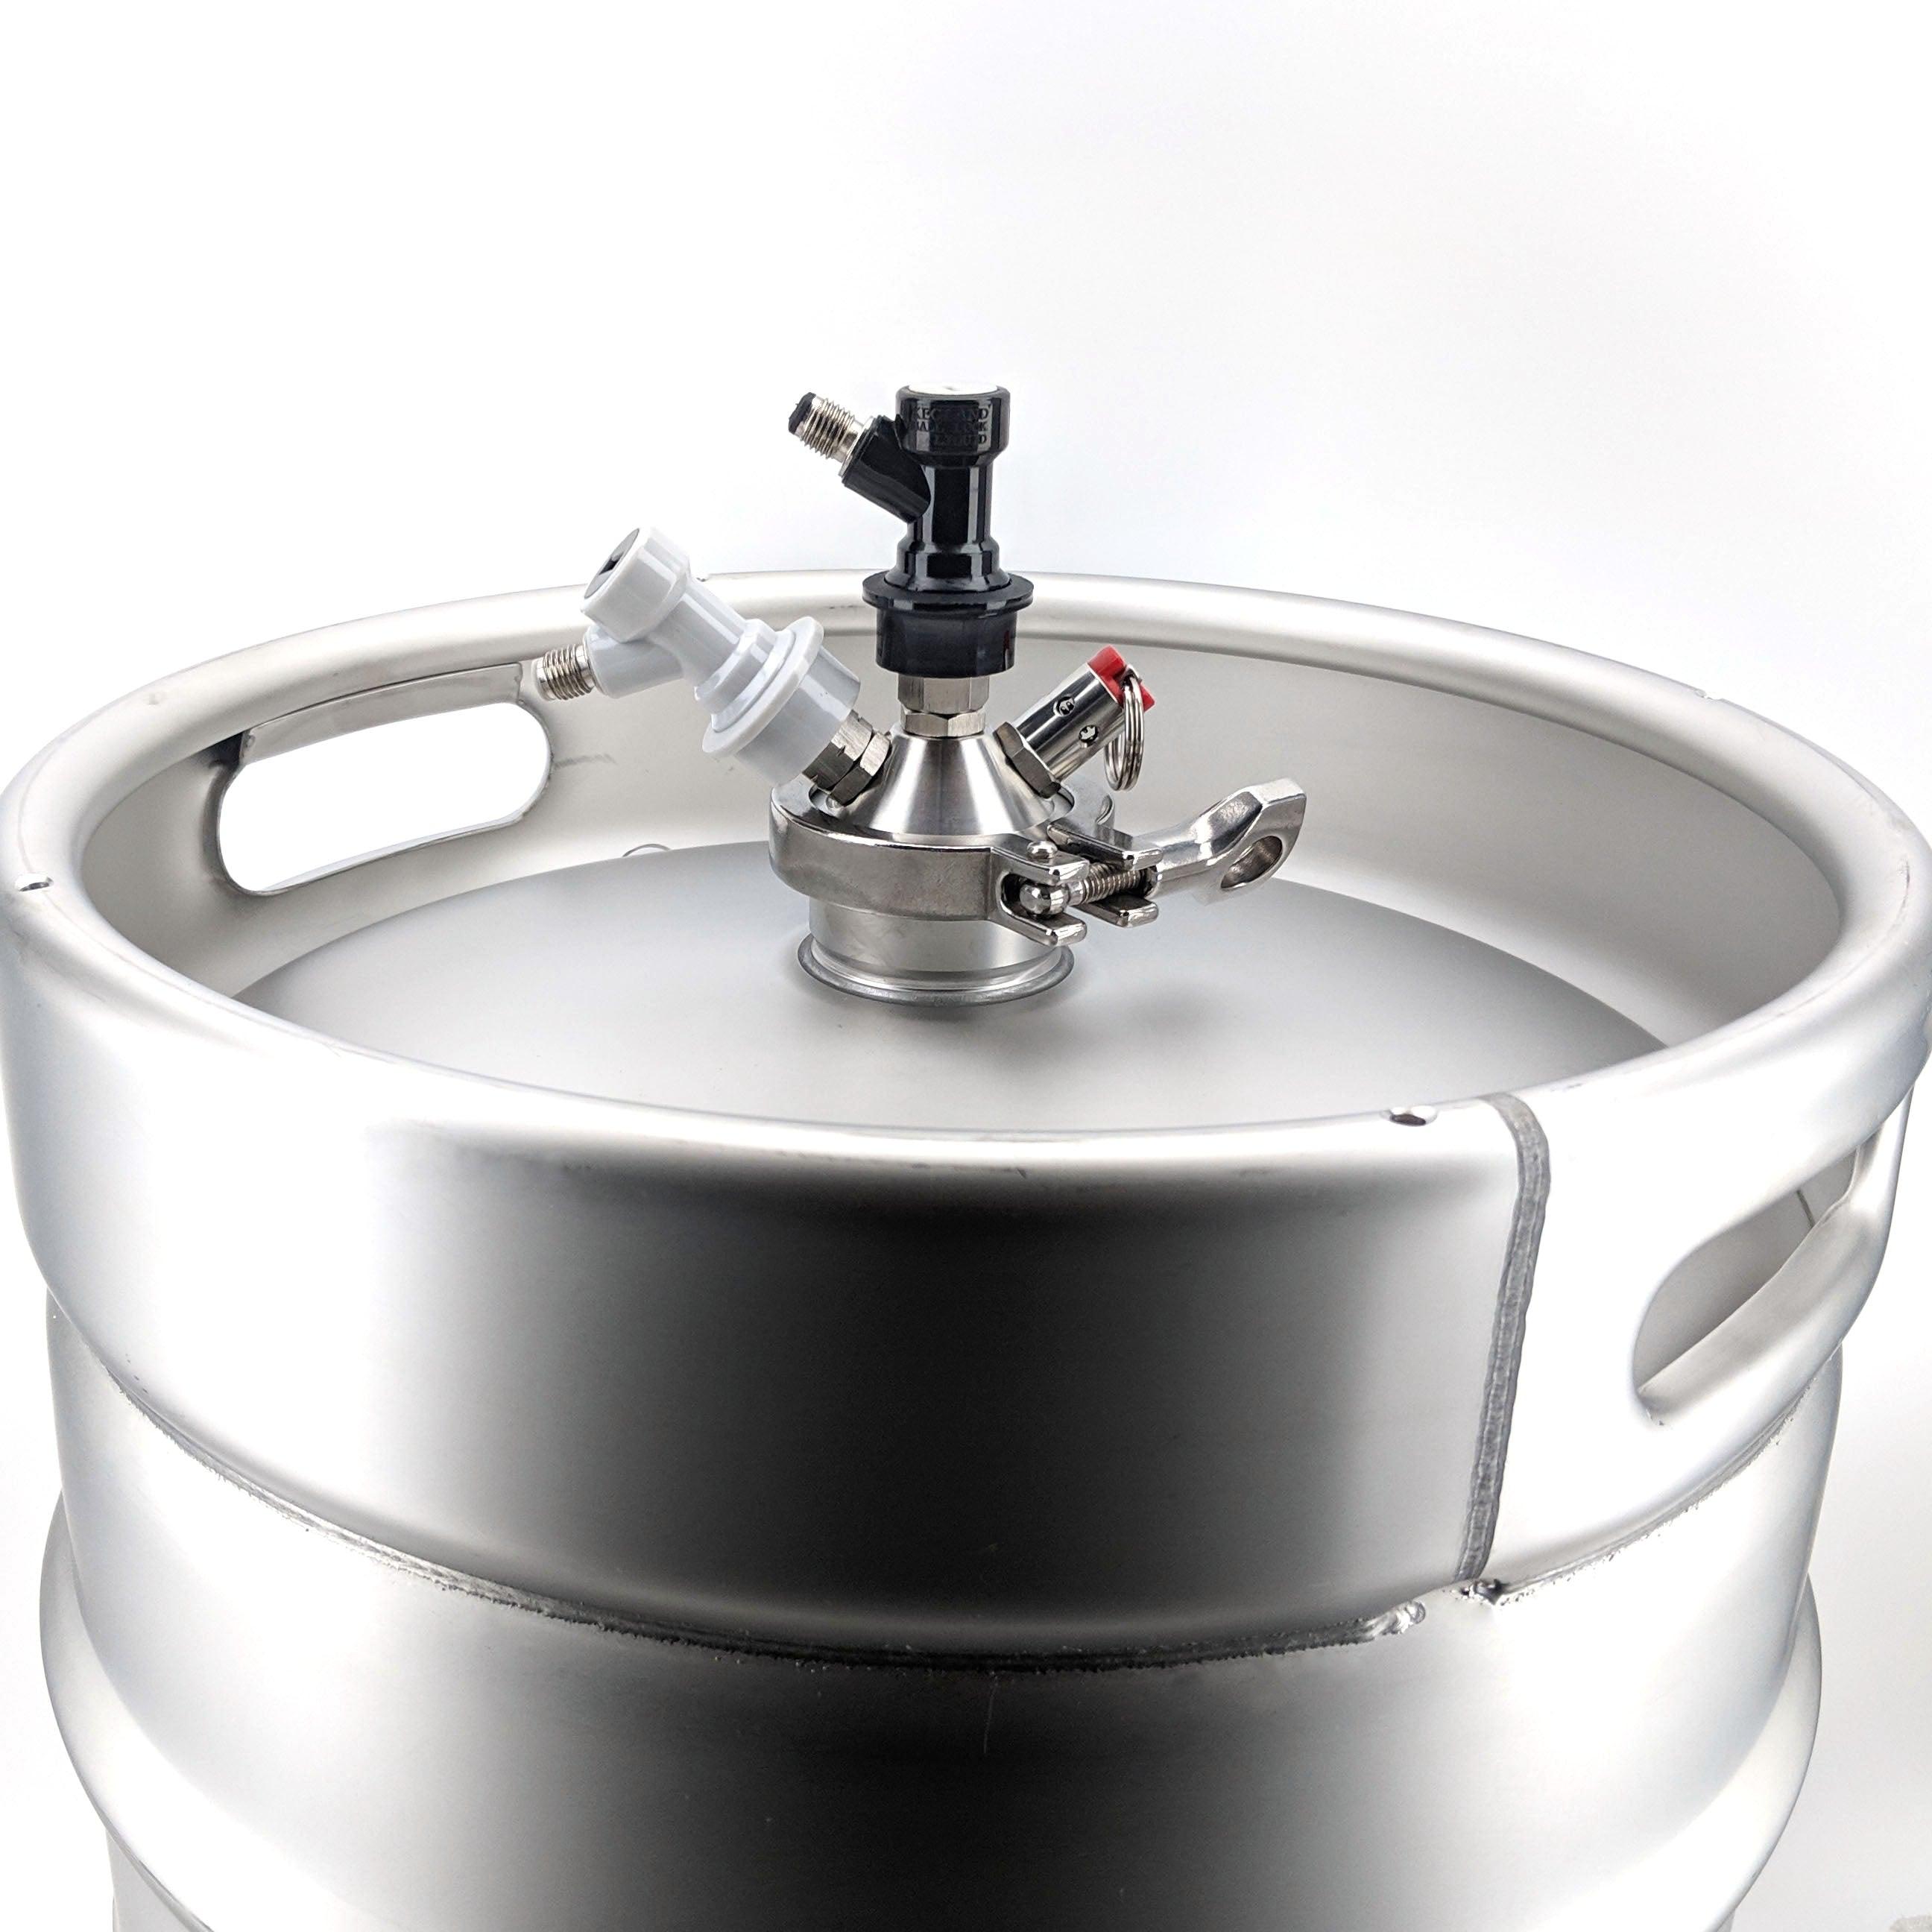 Ball Lock Tapping Head to 2 Inch Tri Clover (Commercial Keg Adaptor) - KegLand